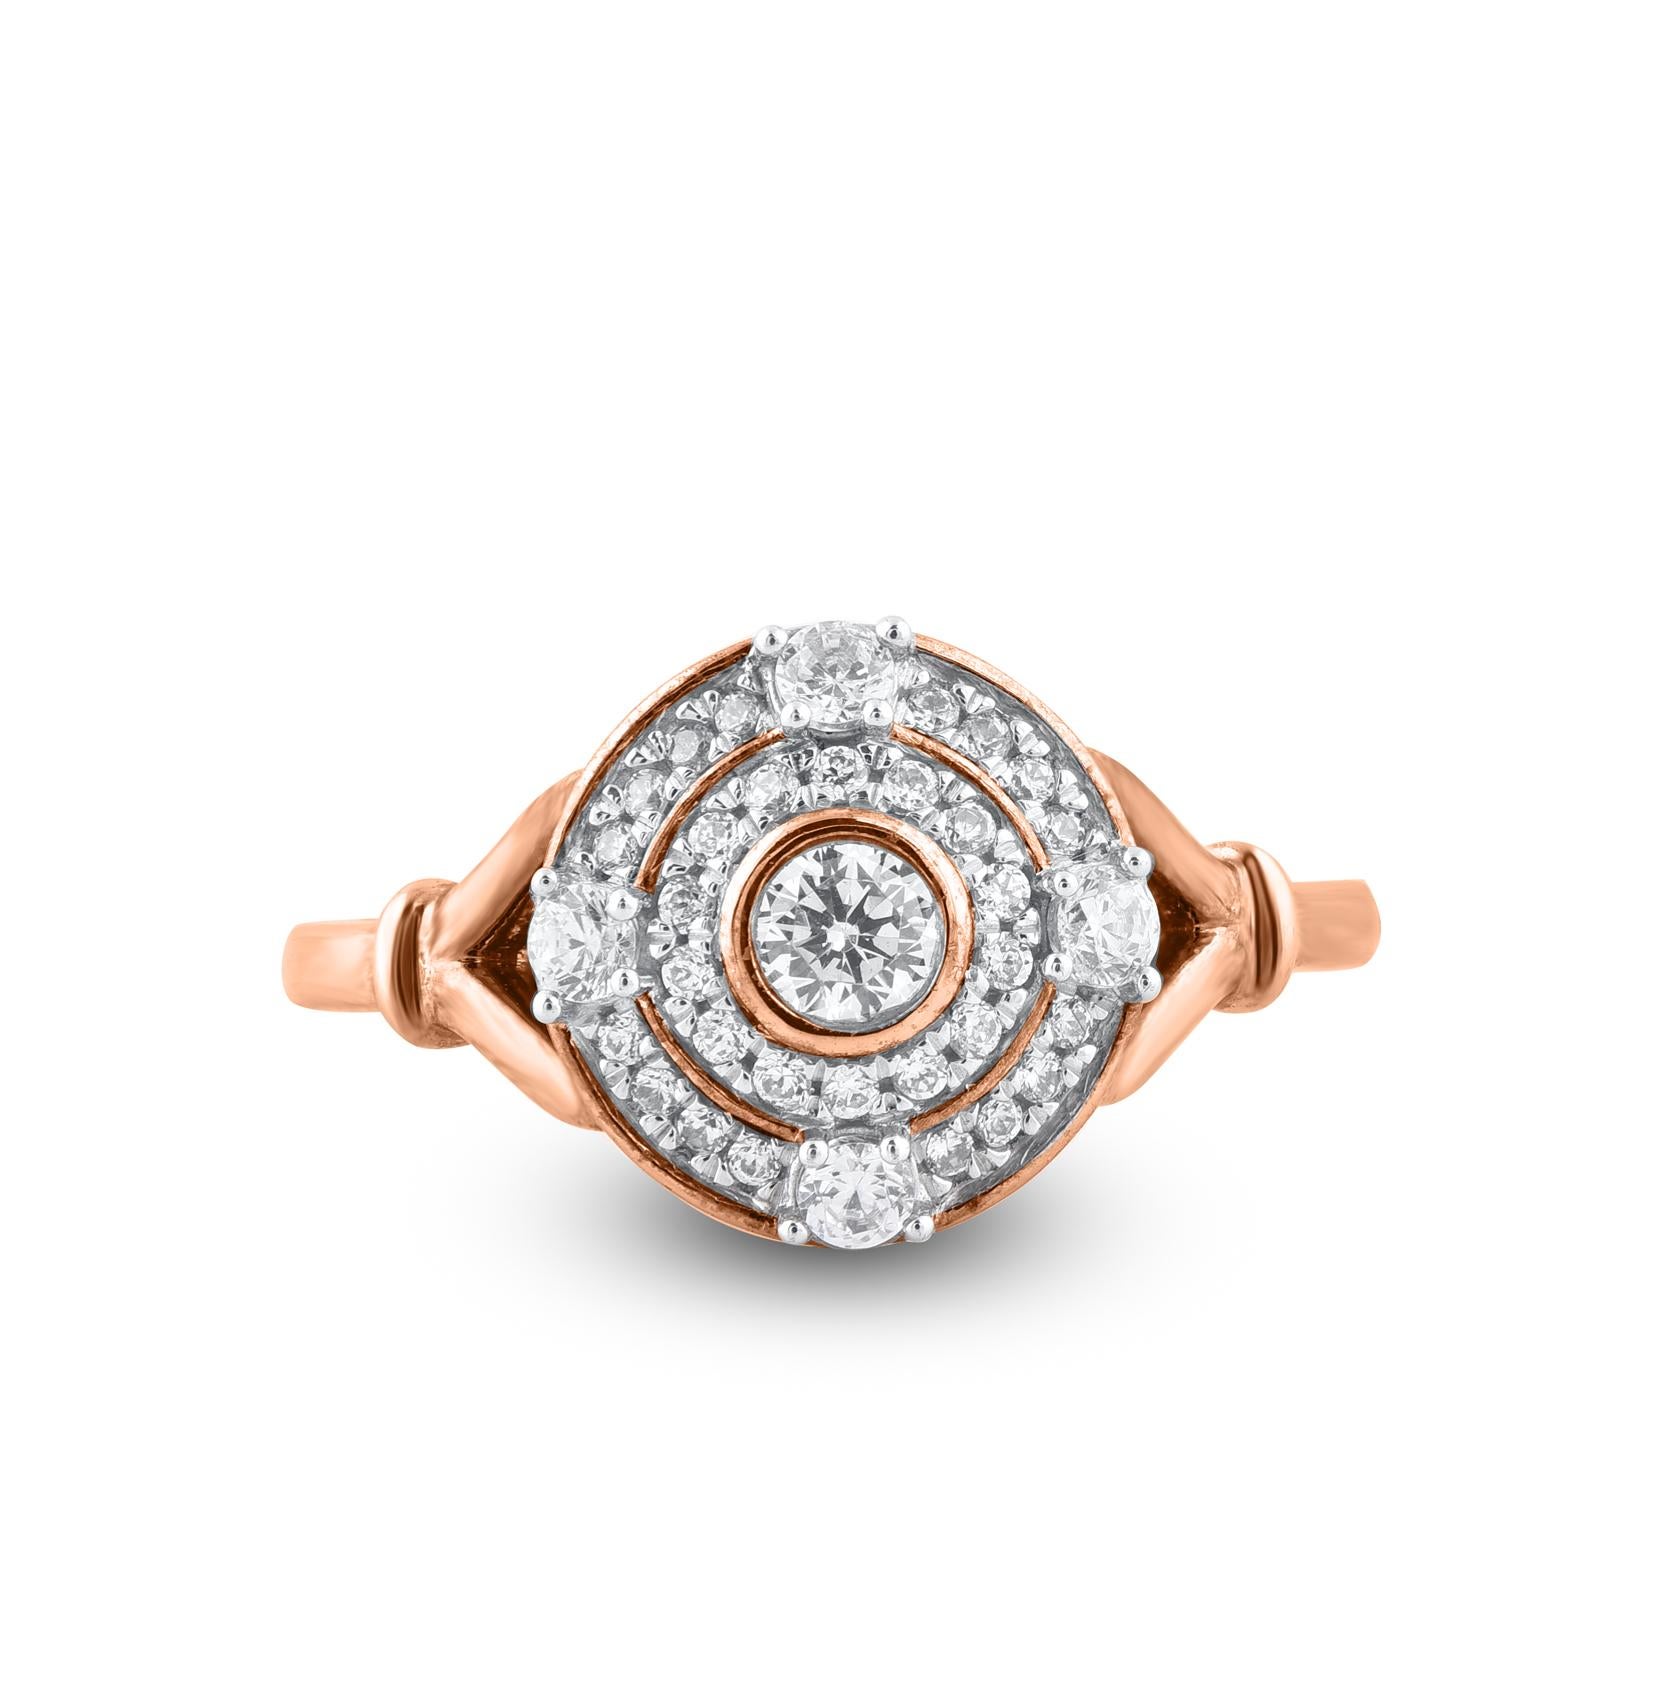 Truly exquisite, this diamond anniversary ring is sure to be admired for the inherent classic beauty and elegance within its design. These ring is crafted in 14KT rose gold, and studded with 35 single cut and brilliant cut natural diamonds in prong